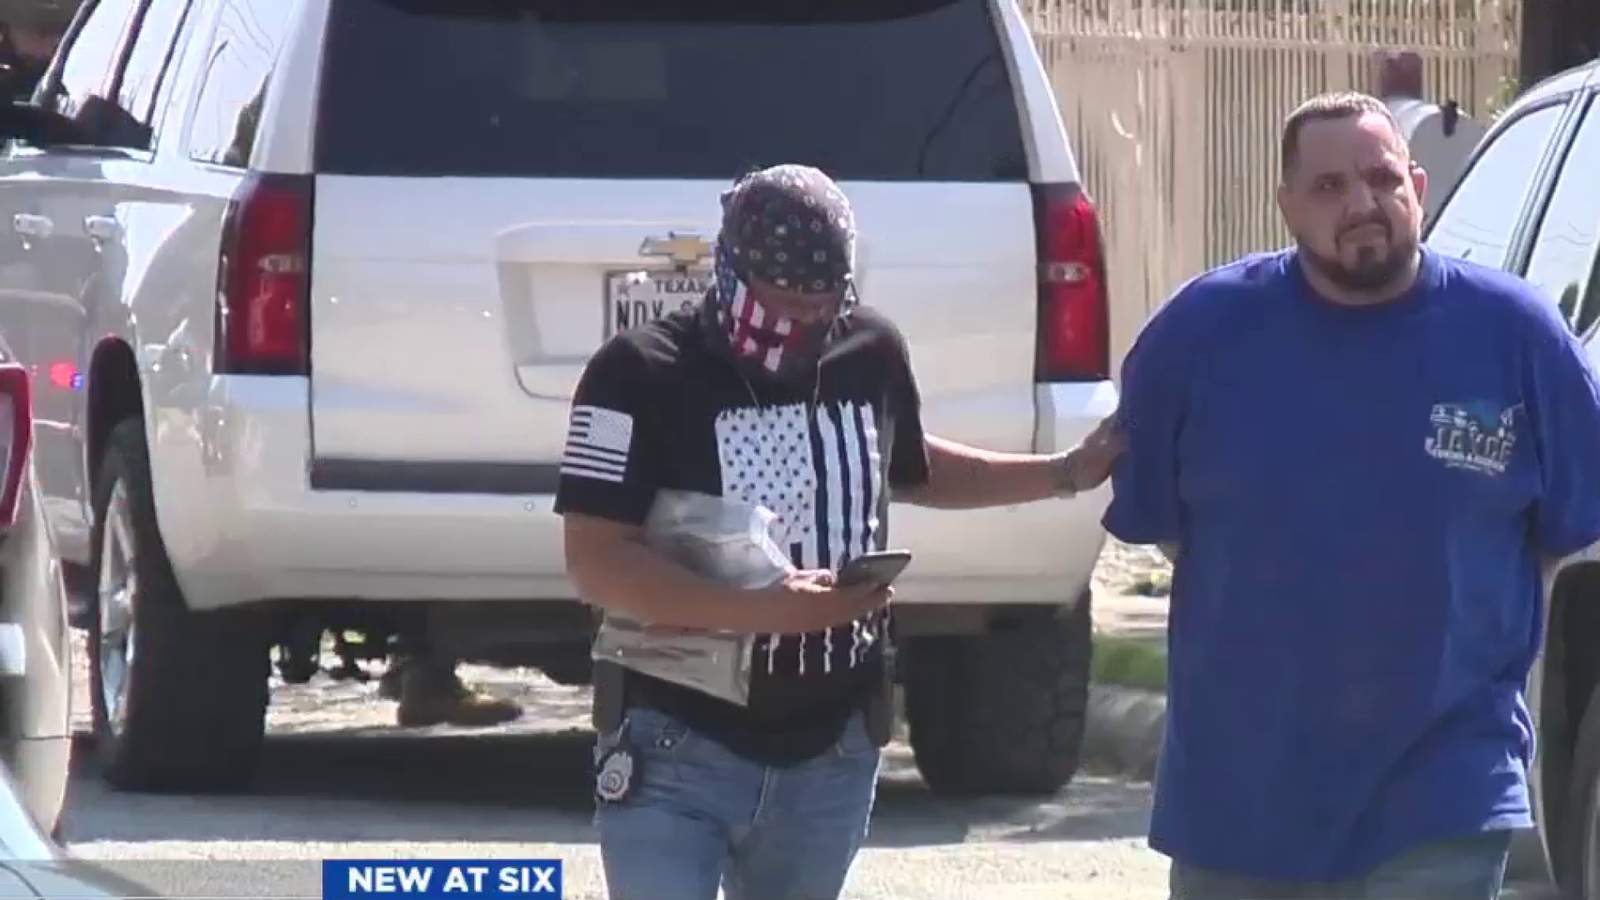 12 purported Mexican-Mafia members arrested on federal drug charges